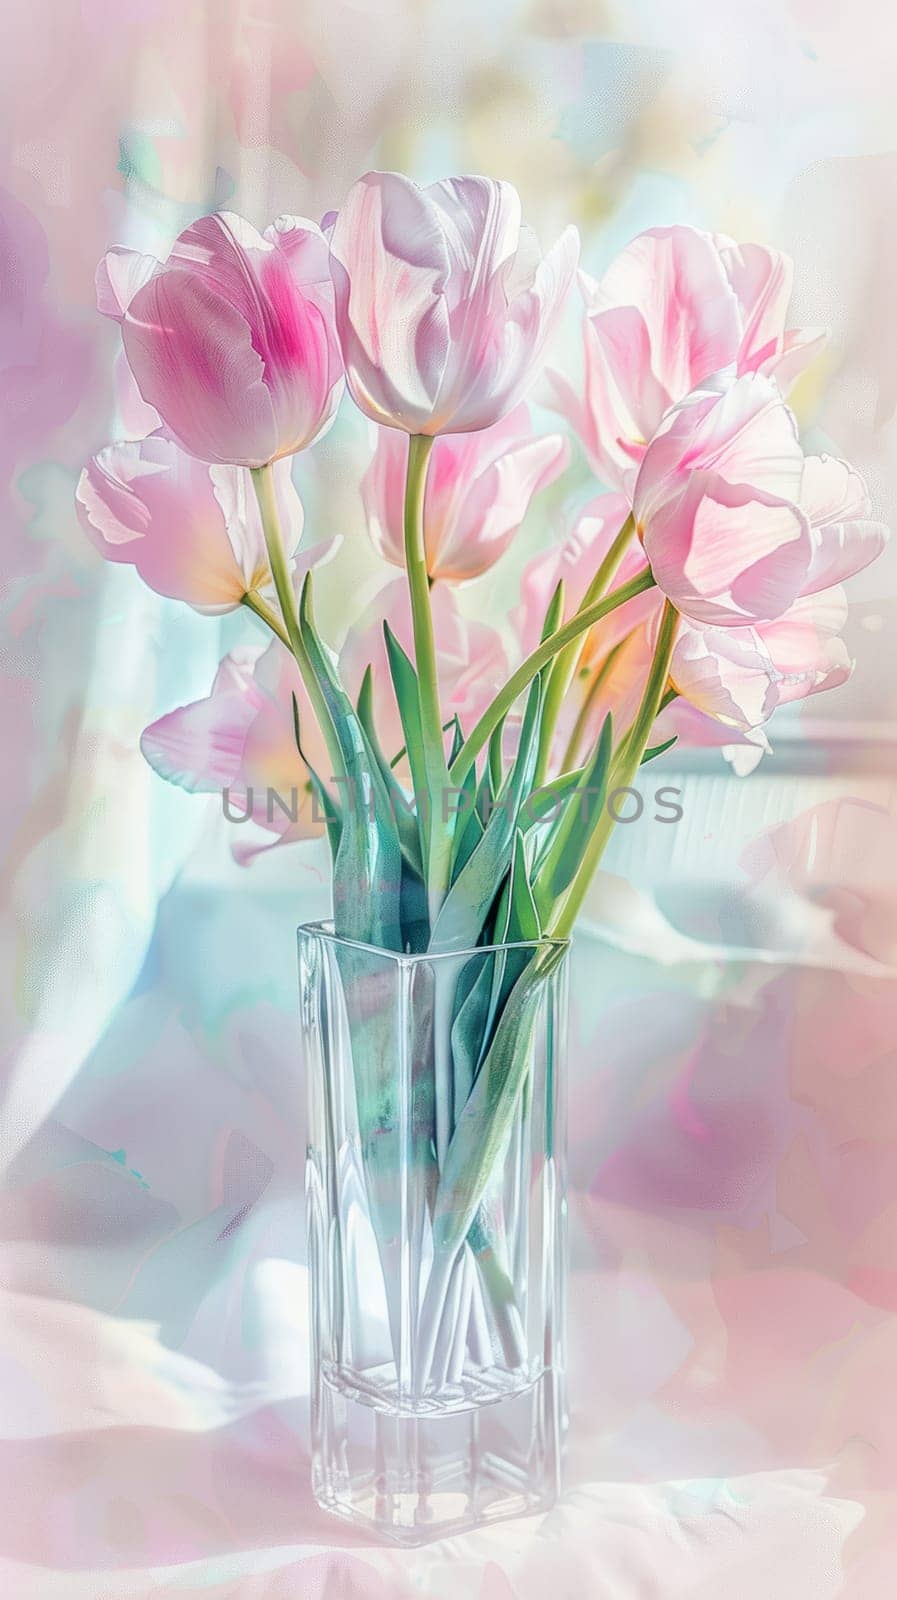 Watercolor pink tulips in a vase.